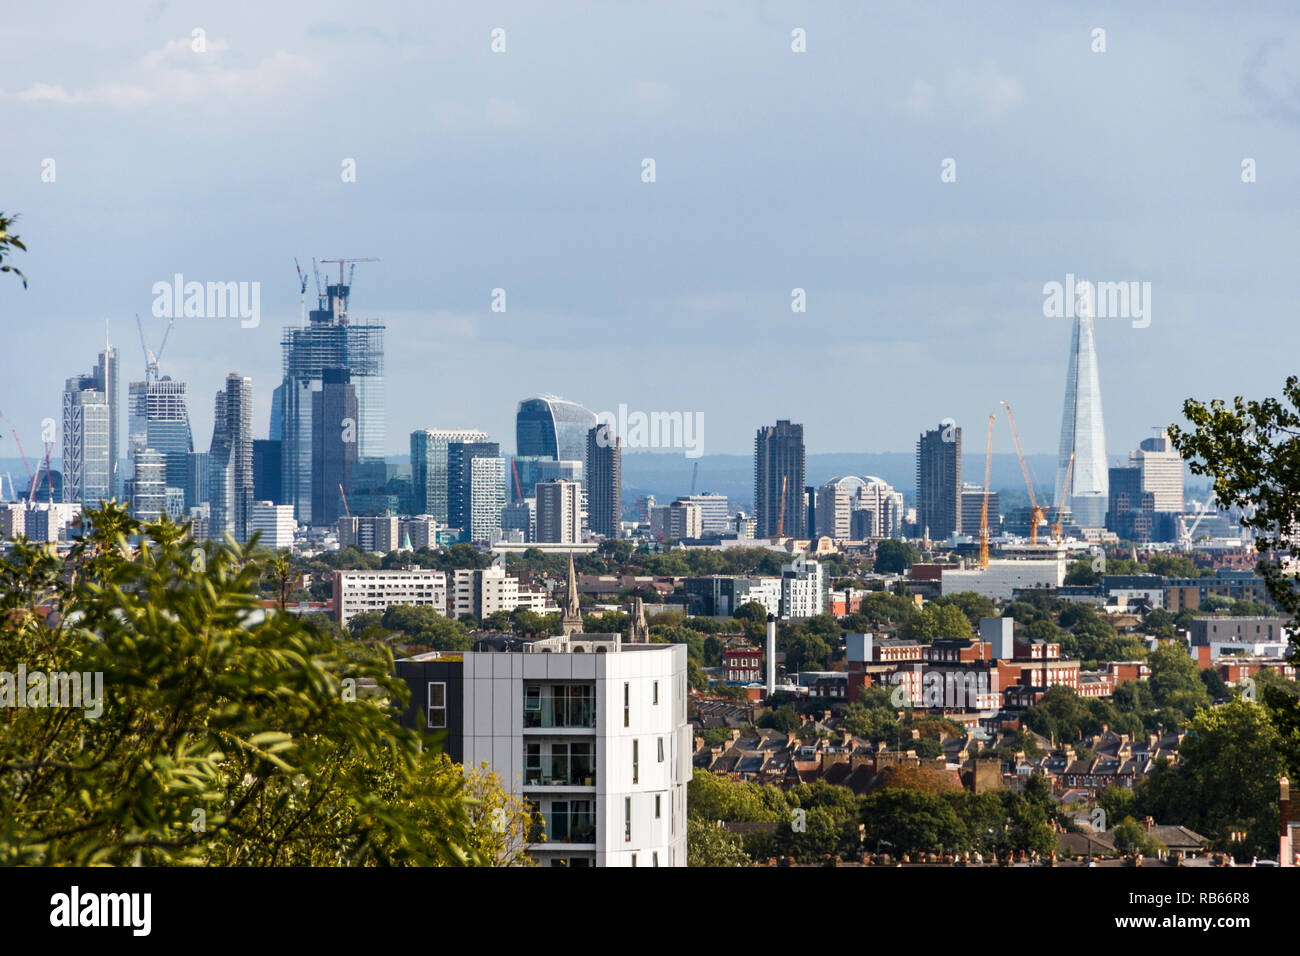 A view of the City of London's changing skyline from Hornsey Lane Bridge, Archway, London, UK Stock Photo